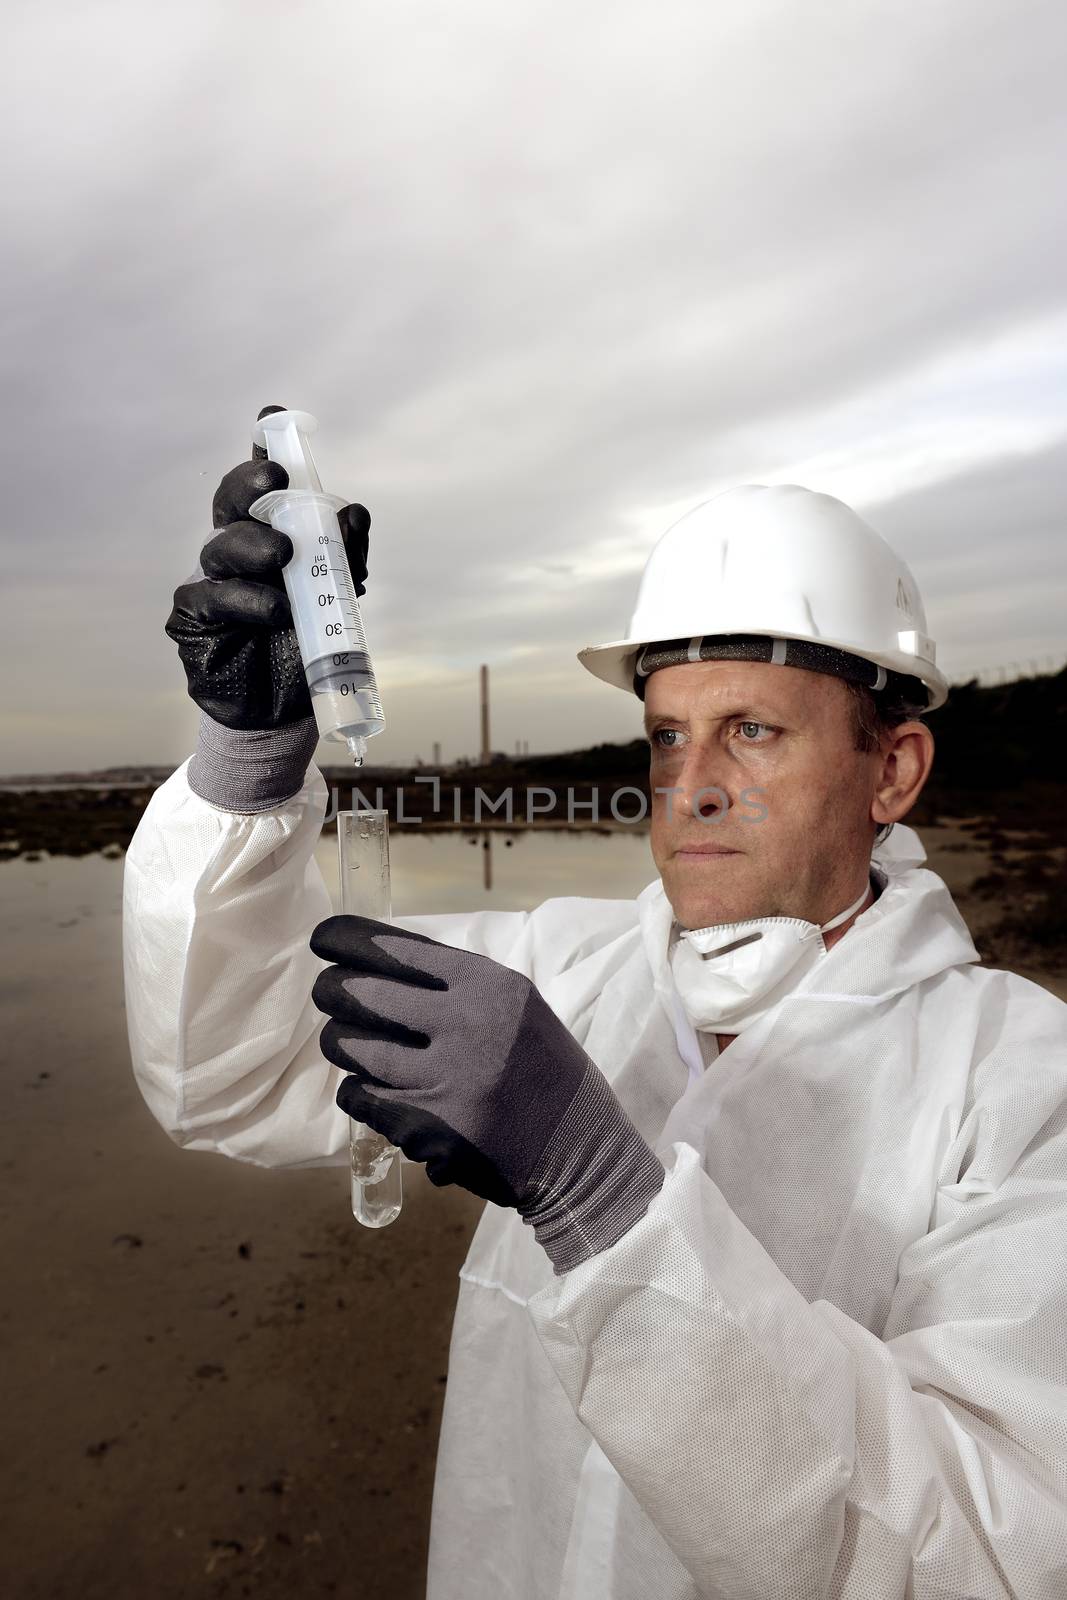 
Worker in a protective suit examining pollution in the water at the industry.